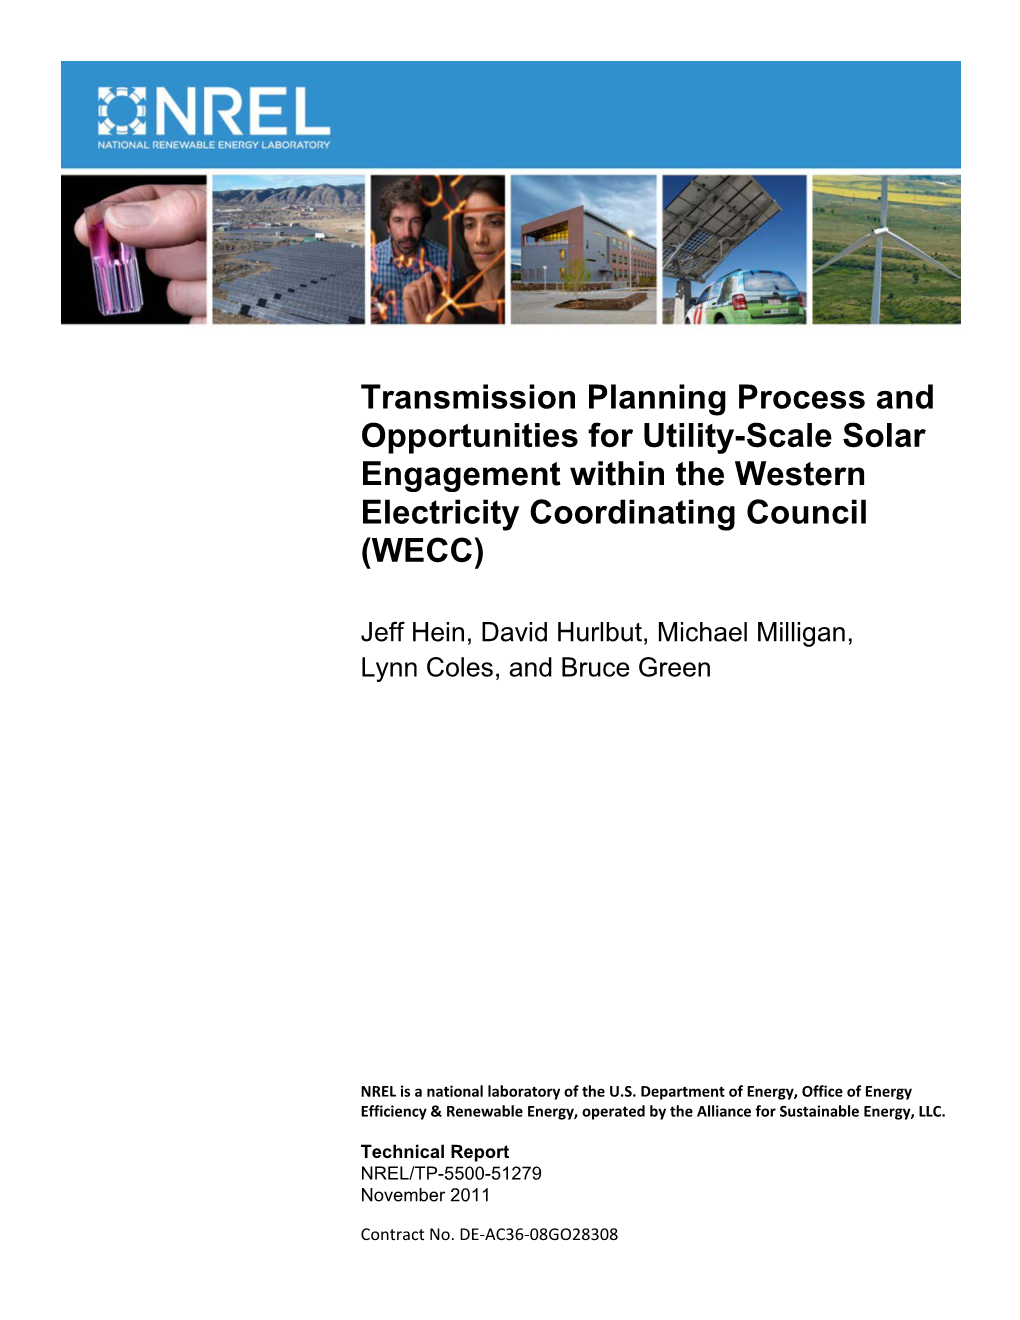 Transmission Planning Process and Opportunities for Utility-Scale Solar Engagement Within the Western Electricity Coordinating Council (WECC)